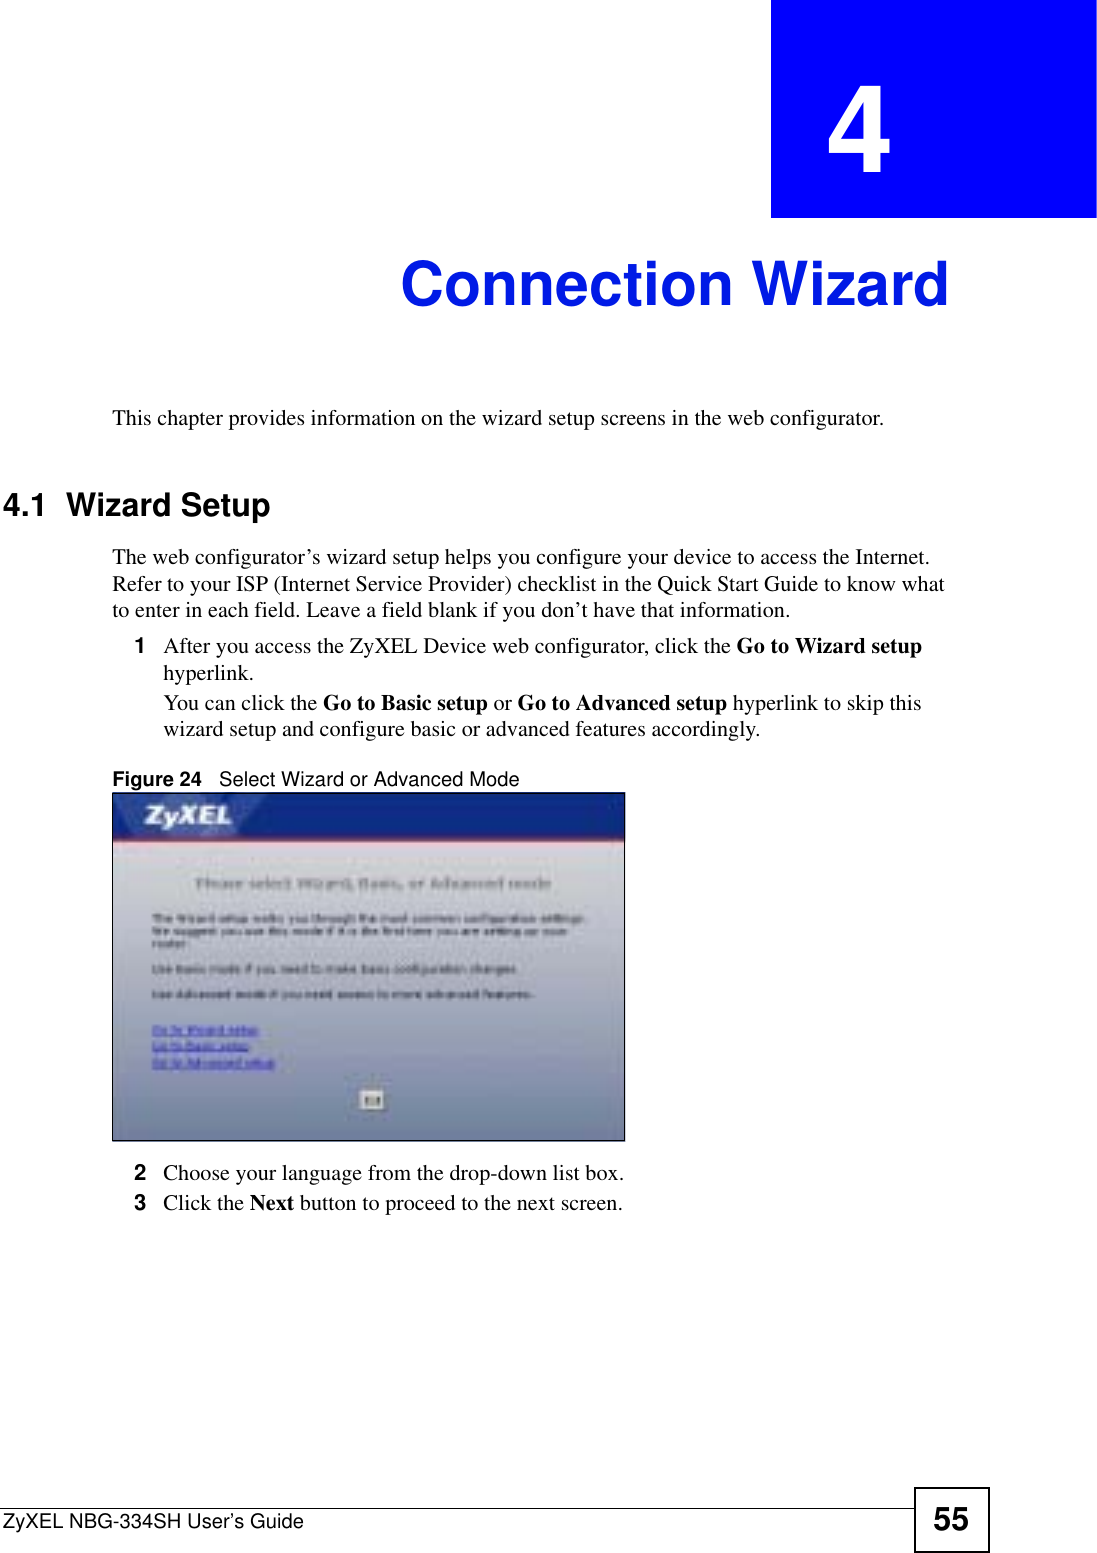 ZyXEL NBG-334SH User’s Guide 55CHAPTER  4 Connection WizardThis chapter provides information on the wizard setup screens in the web configurator.4.1  Wizard SetupThe web configurator’s wizard setup helps you configure your device to access the Internet. Refer to your ISP (Internet Service Provider) checklist in the Quick Start Guide to know what to enter in each field. Leave a field blank if you don’t have that information.1After you access the ZyXEL Device web configurator, click the Go to Wizard setuphyperlink.You can click the Go to Basic setup or Go to Advanced setup hyperlink to skip this wizard setup and configure basic or advanced features accordingly.Figure 24   Select Wizard or Advanced Mode2Choose your language from the drop-down list box.3Click the Next button to proceed to the next screen.